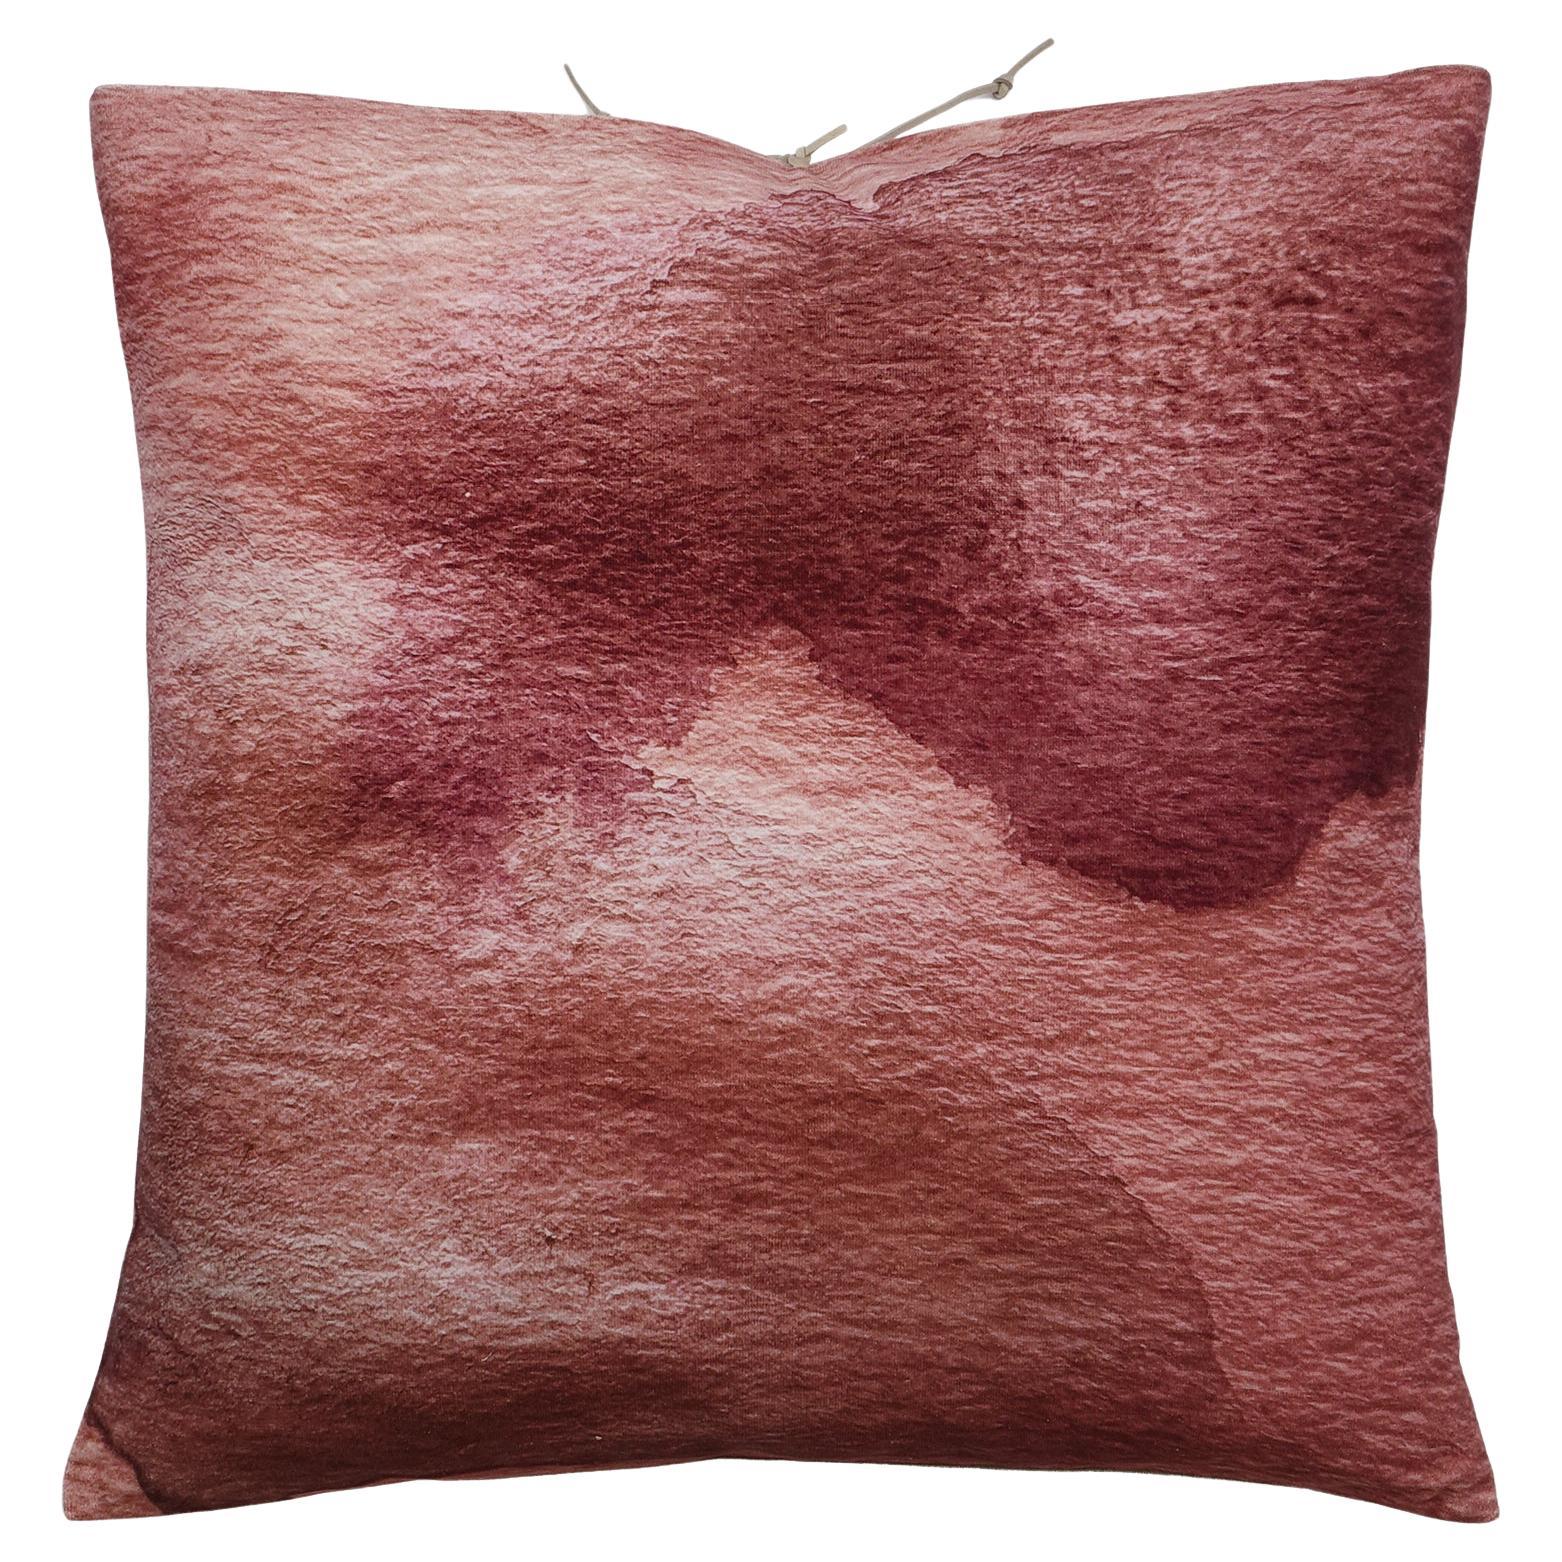 Printed Velvet Pillow Smudge Putty For Sale